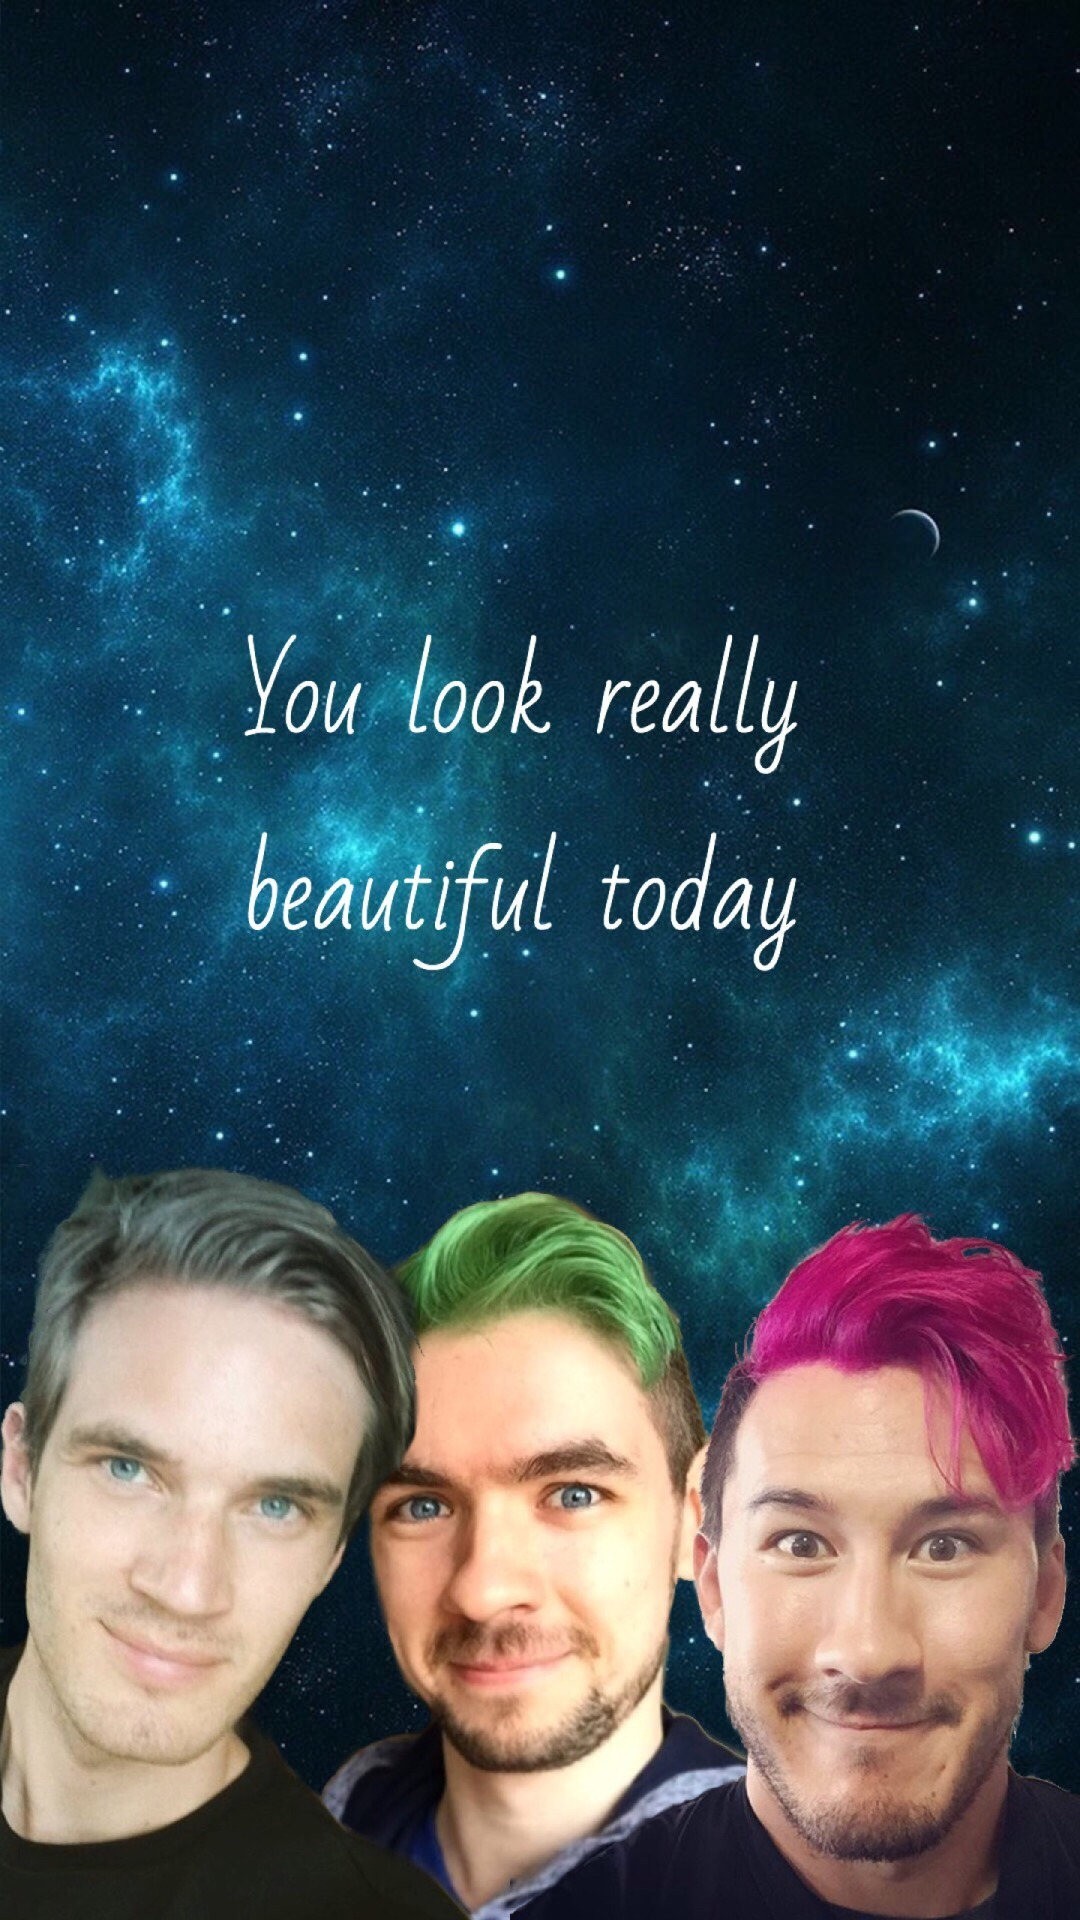 1080x1920 Top Images for Markiplier and Jacksepticeye Computer Backgrounds on  picsunday.com. 06/03/2019 to 12:44